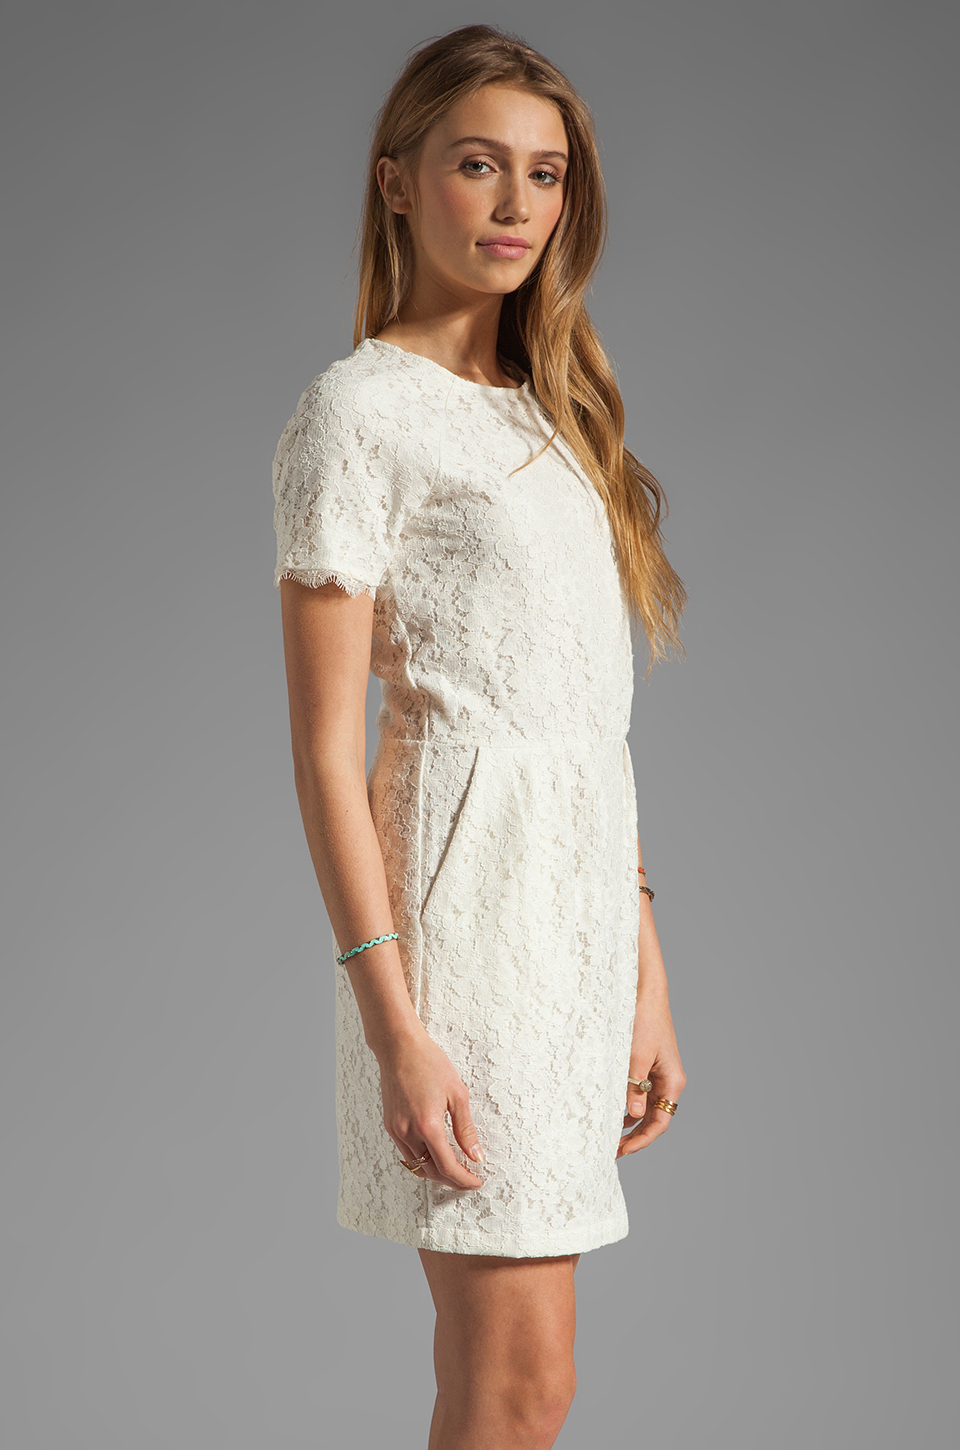 Lyst - Dolce Vita Sarus Raised Lace Short Sleeve Dress in White